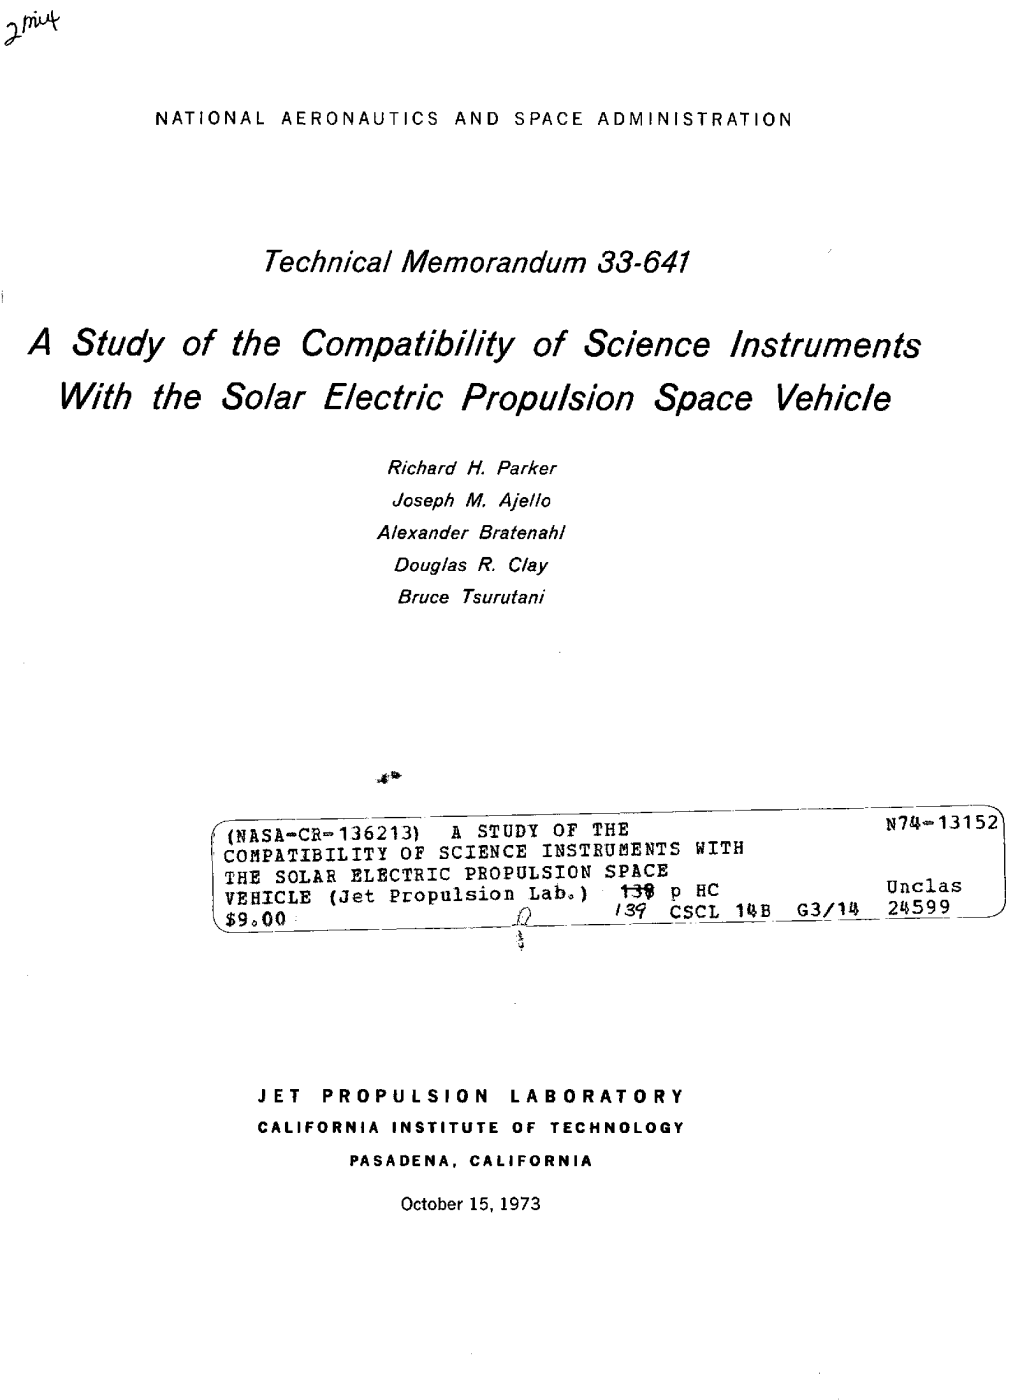 A Study of the Compatibility of Science Instruments with the Solar Electric Propulsion Space Vehicle